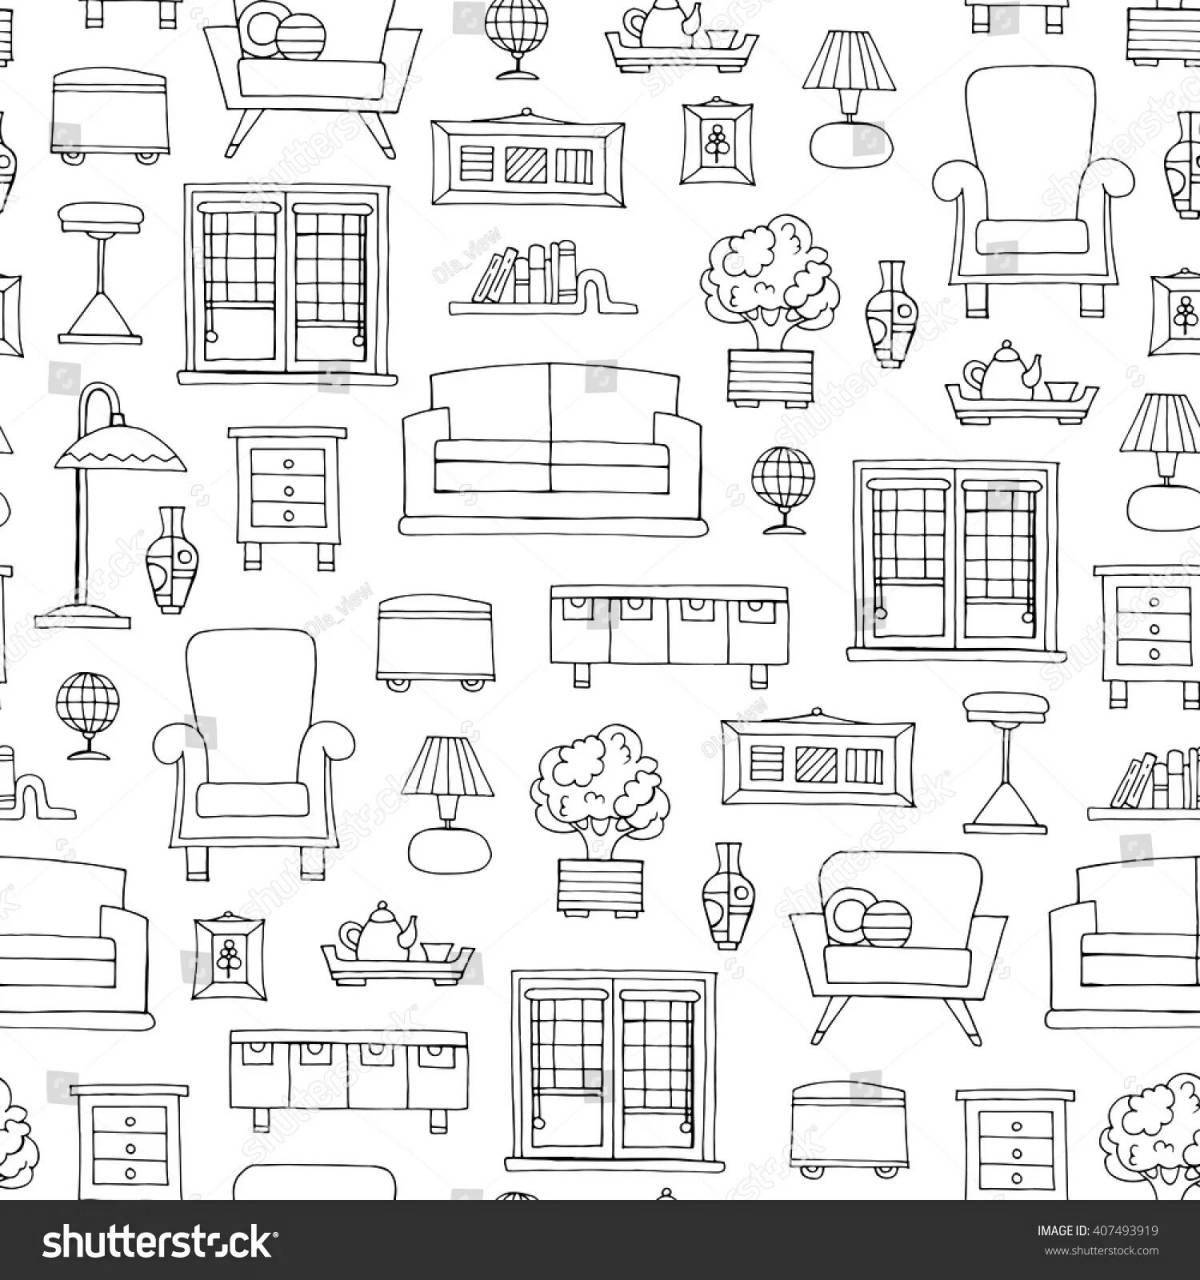 Ami cute furniture house coloring page